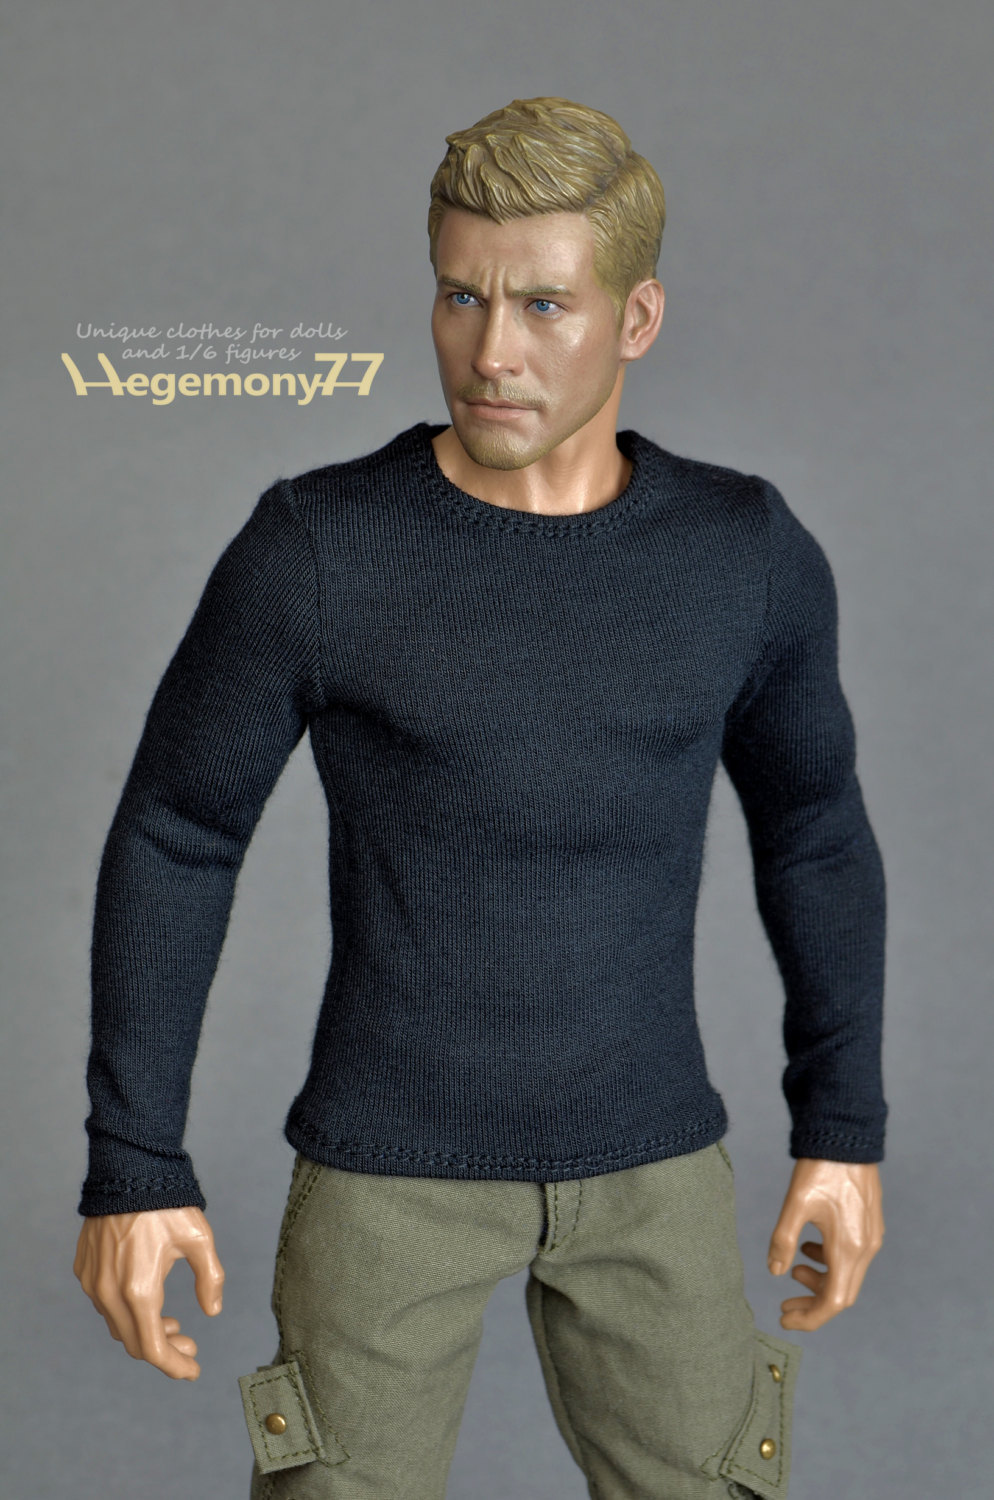 Details about   1/6 Scale Tee Hot Black Long Sleeves T-Shirt For 12" Action Figure Toys 